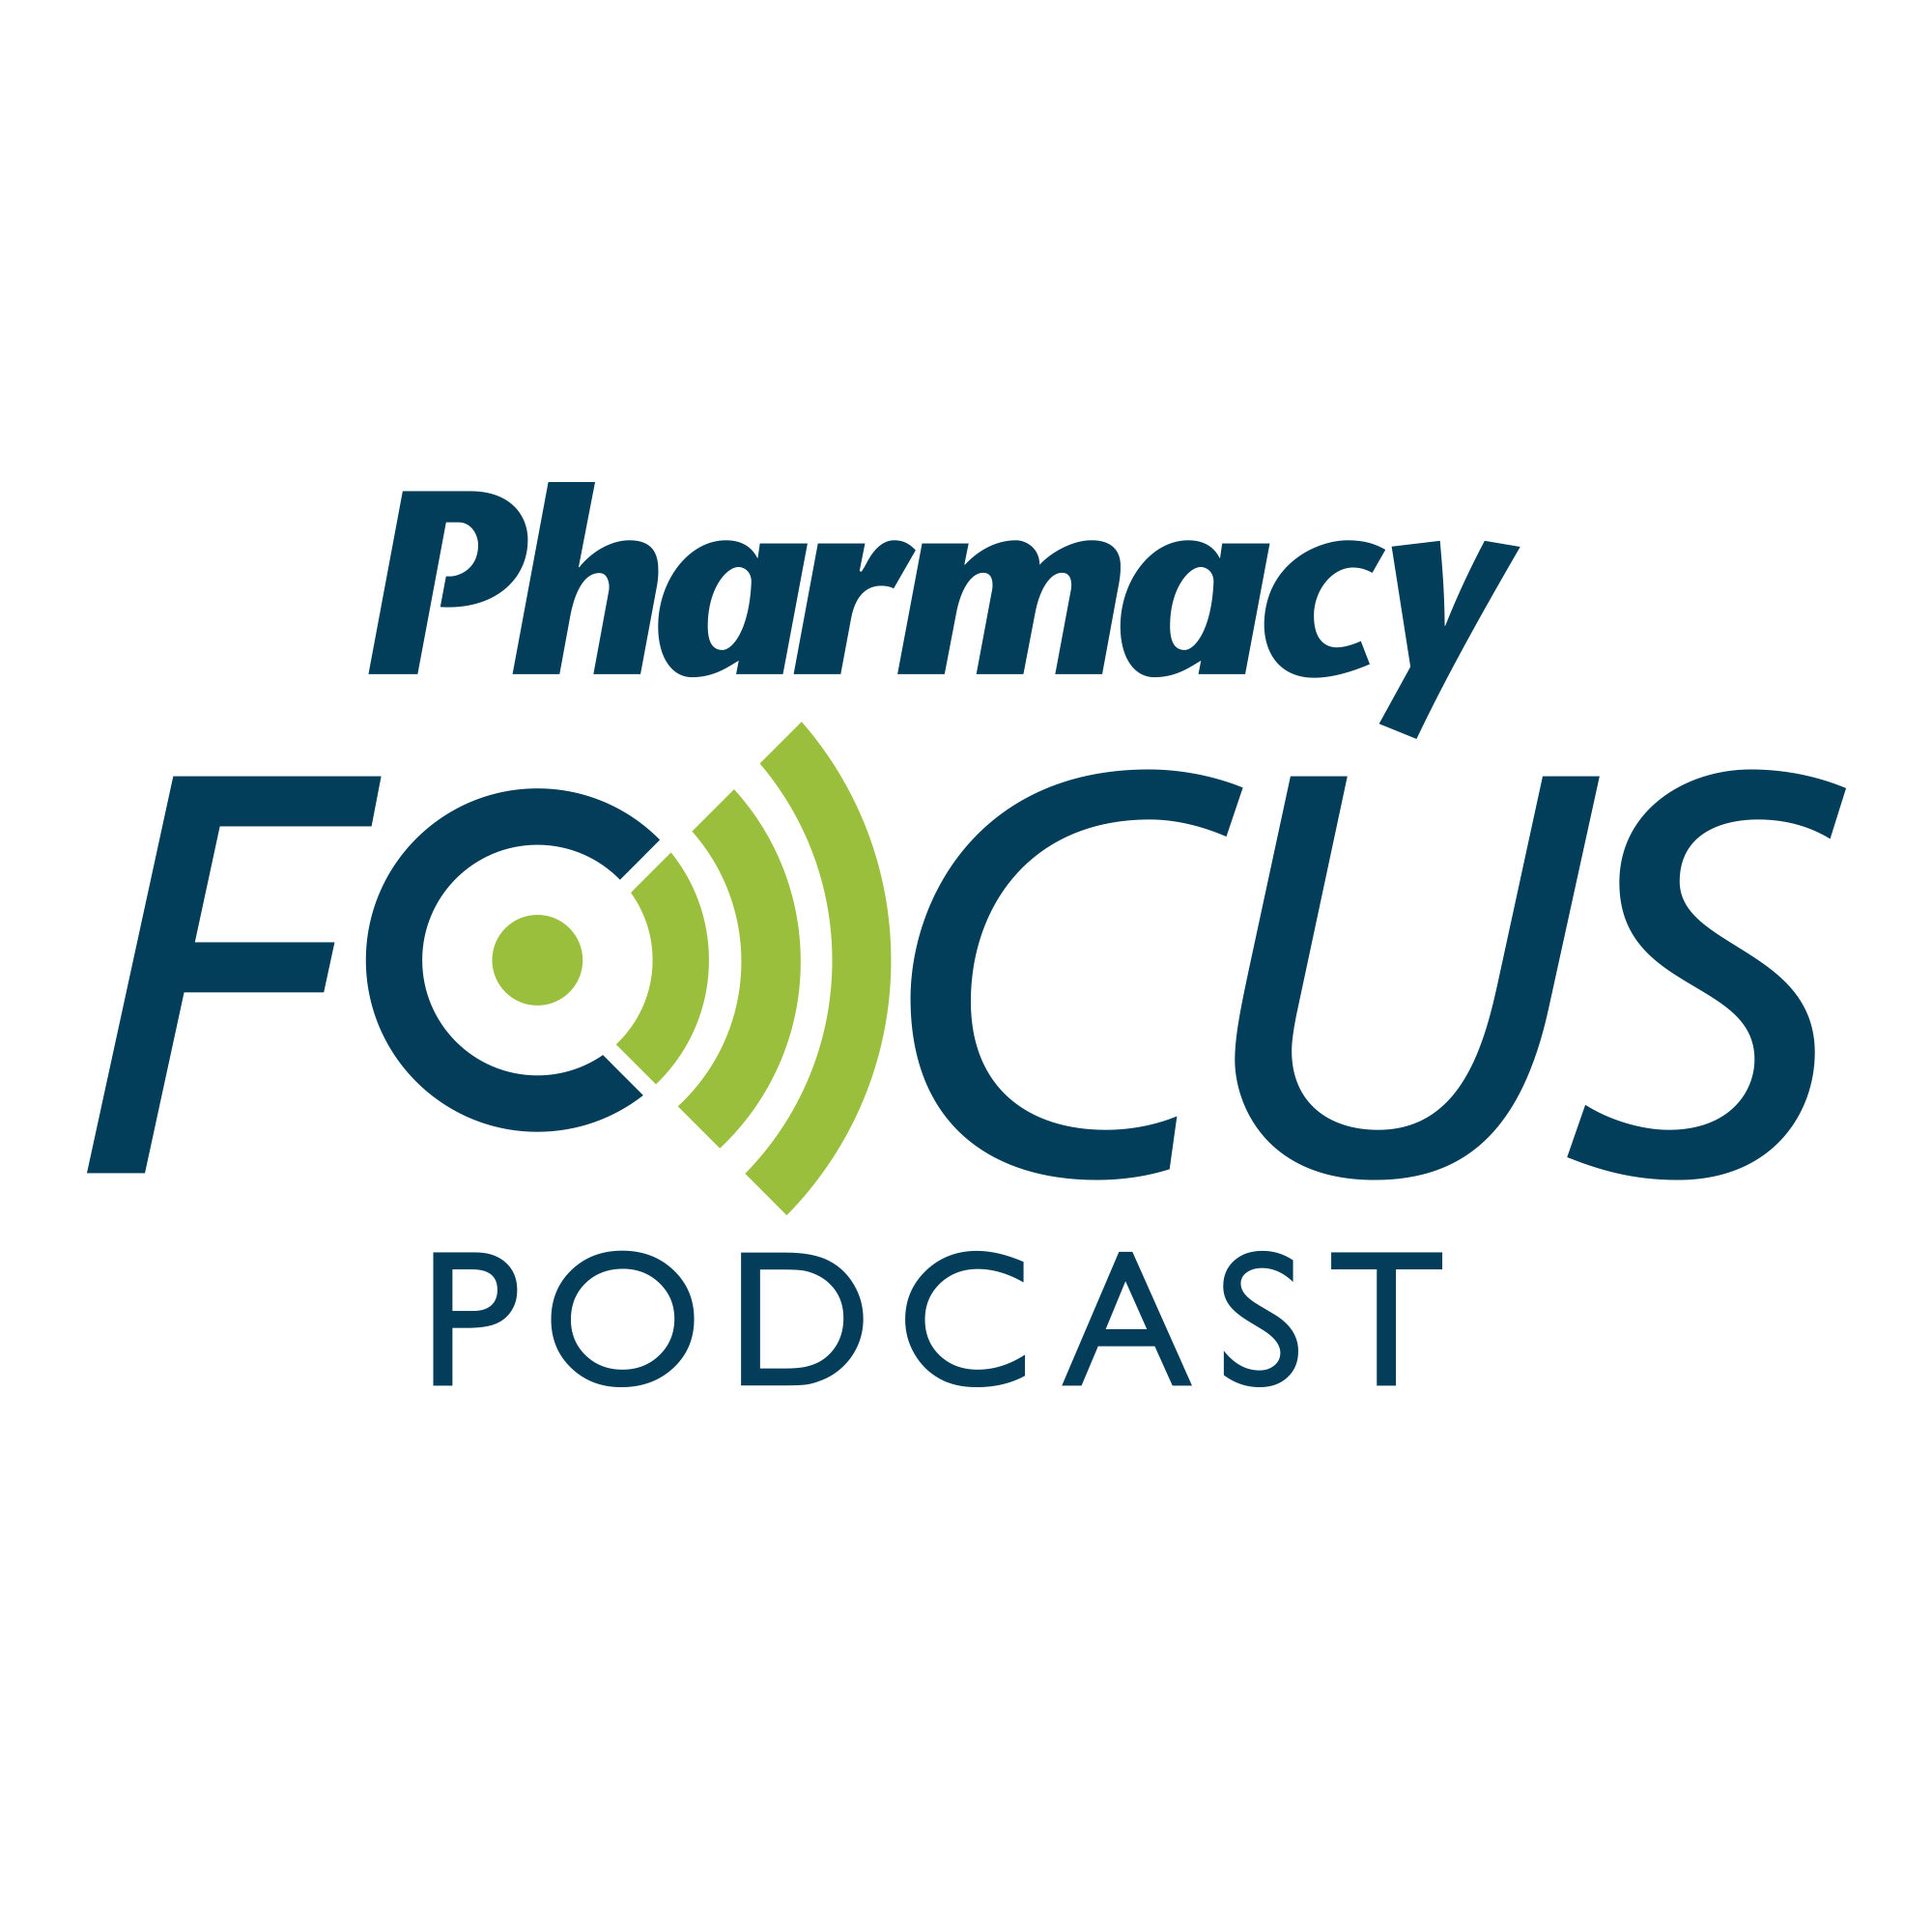 Pharmacy Focus Episode 55: Advocating for Support as a Health Systems Pharmacist